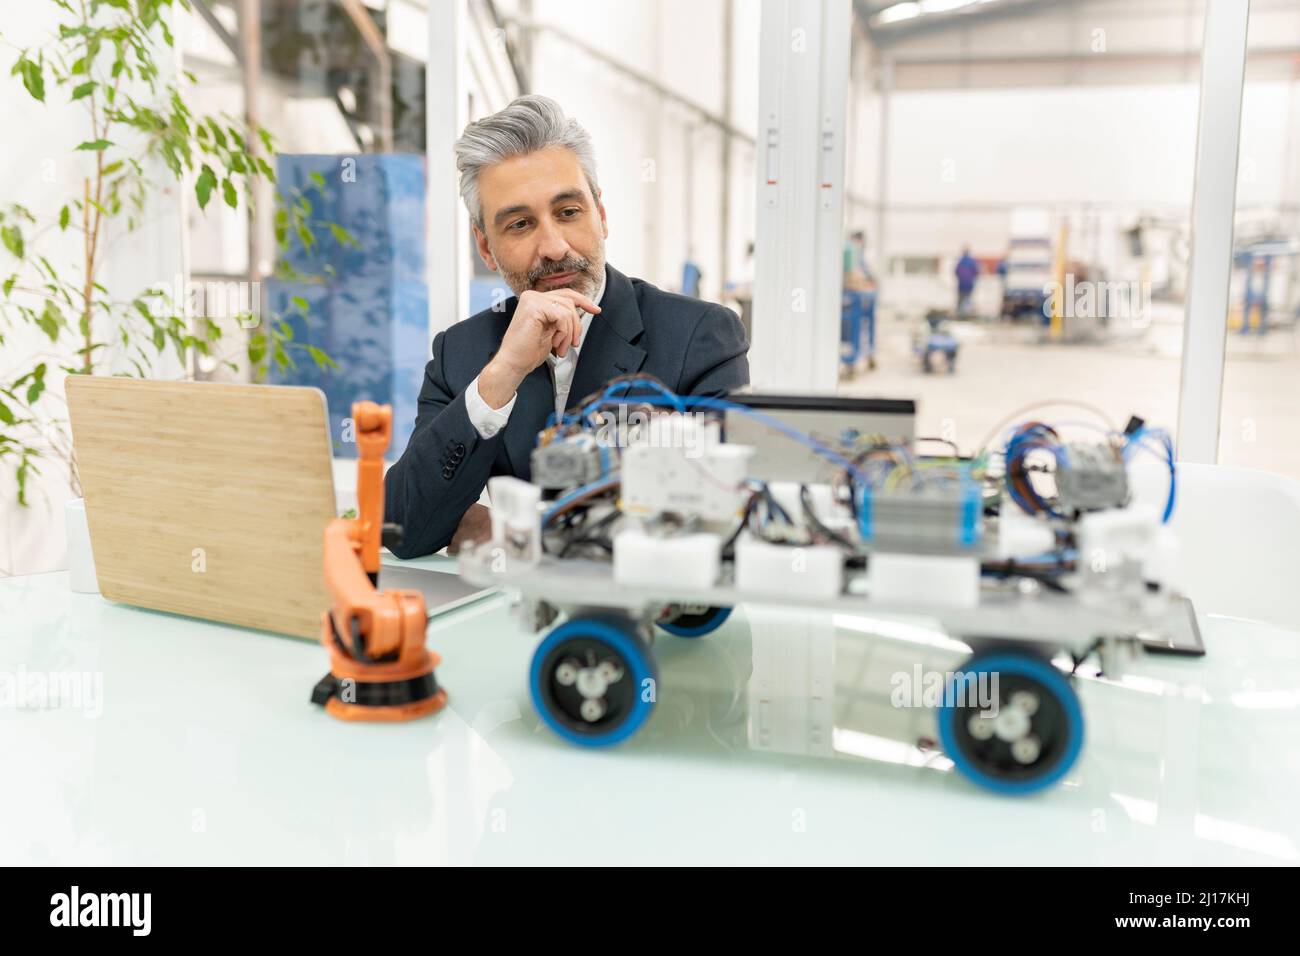 Businessman sitting with hand on chin looking at model of robotic vehicle in factory Stock Photo